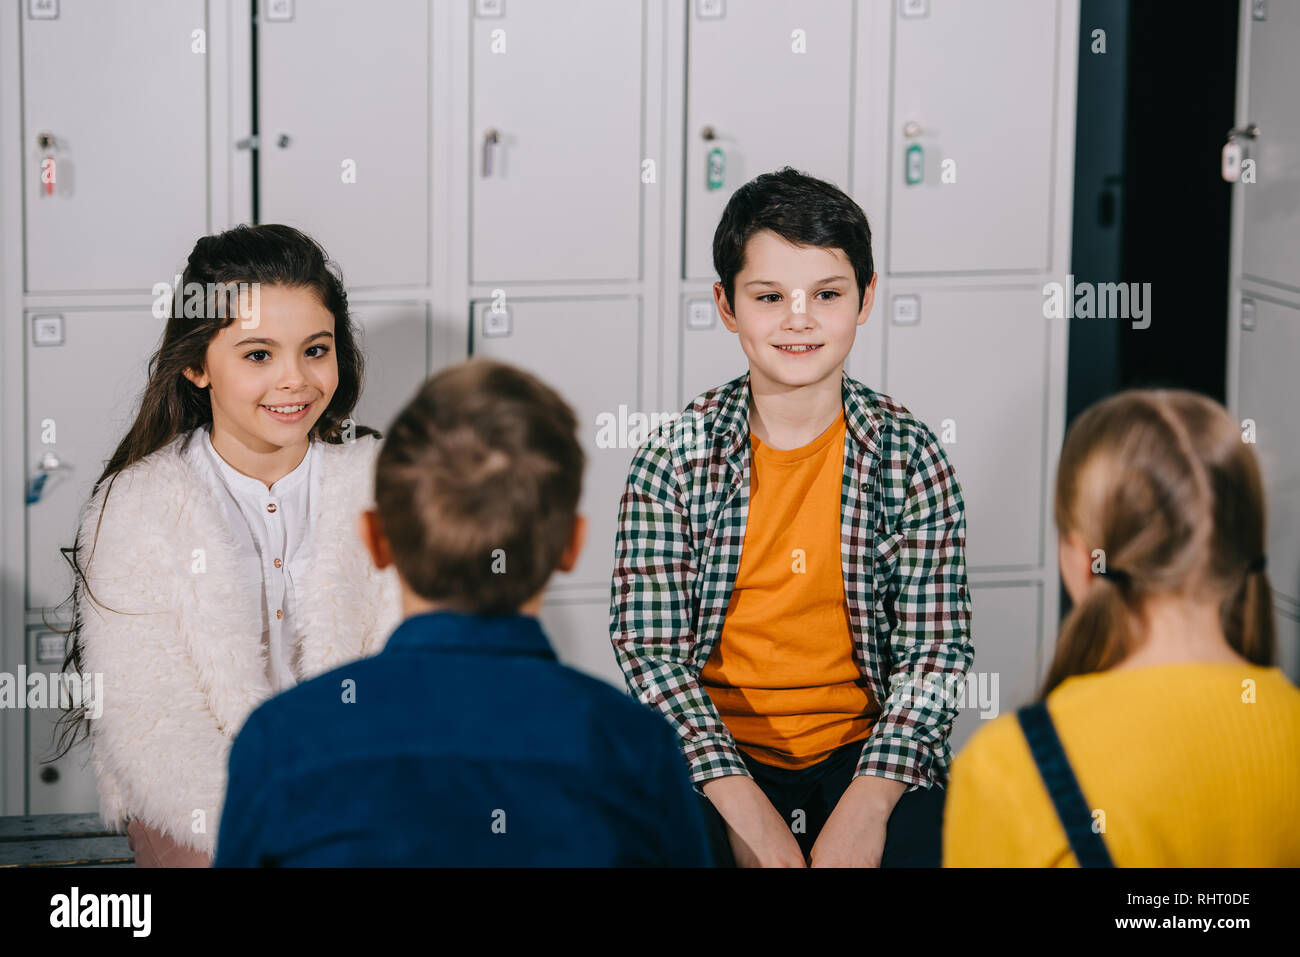 Group of children talking in changing room Stock Photo